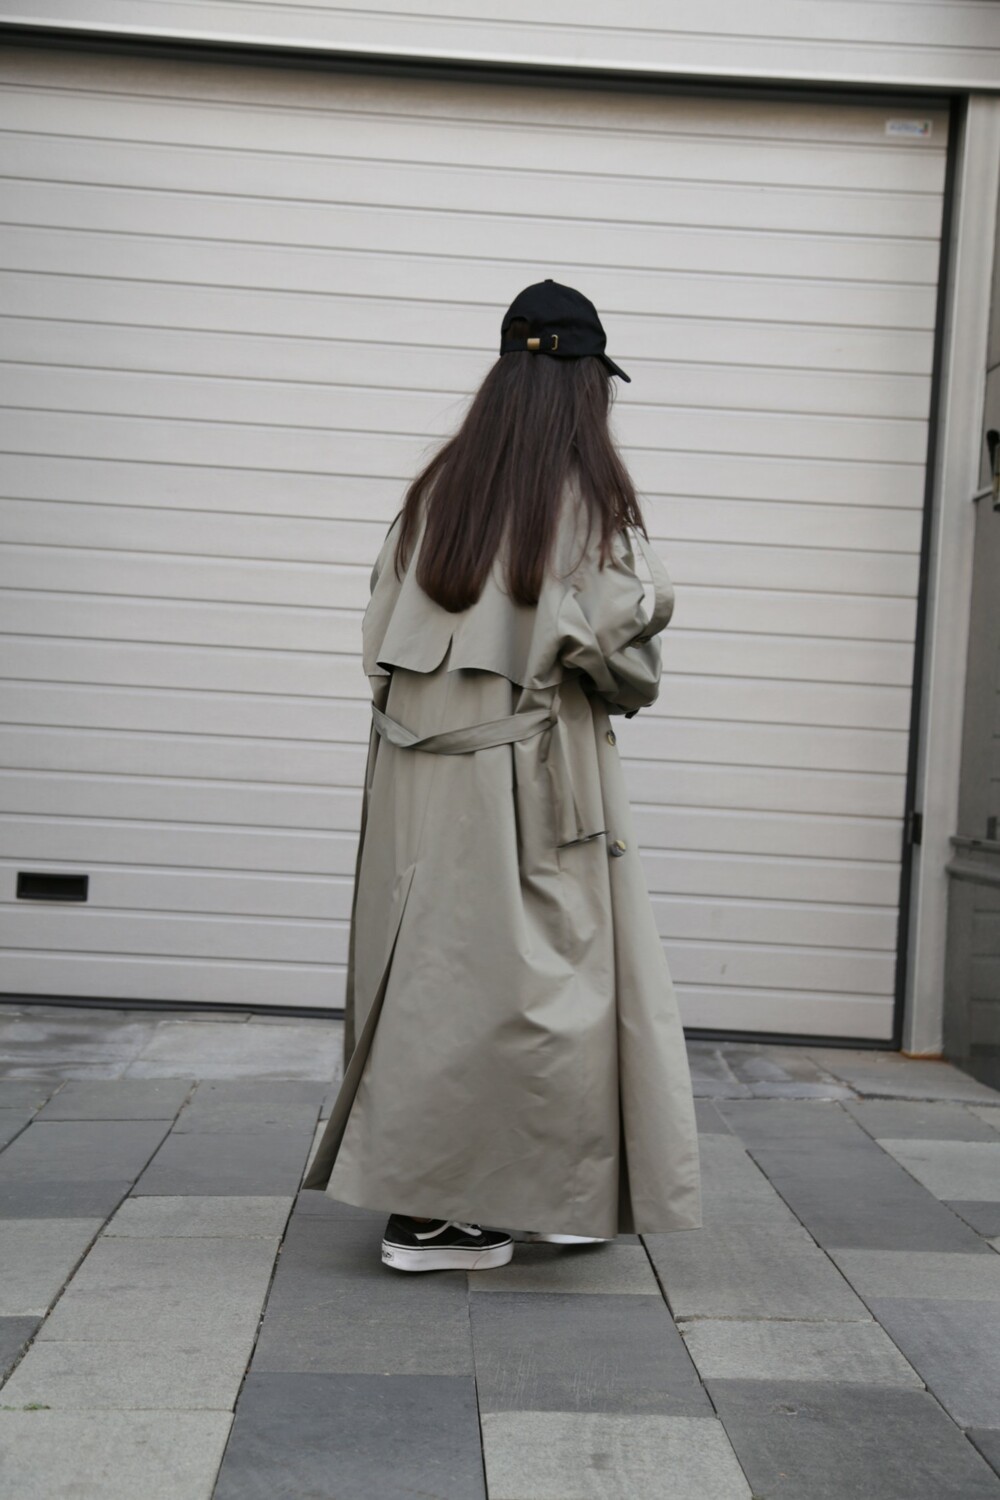 Trench coat in olive color